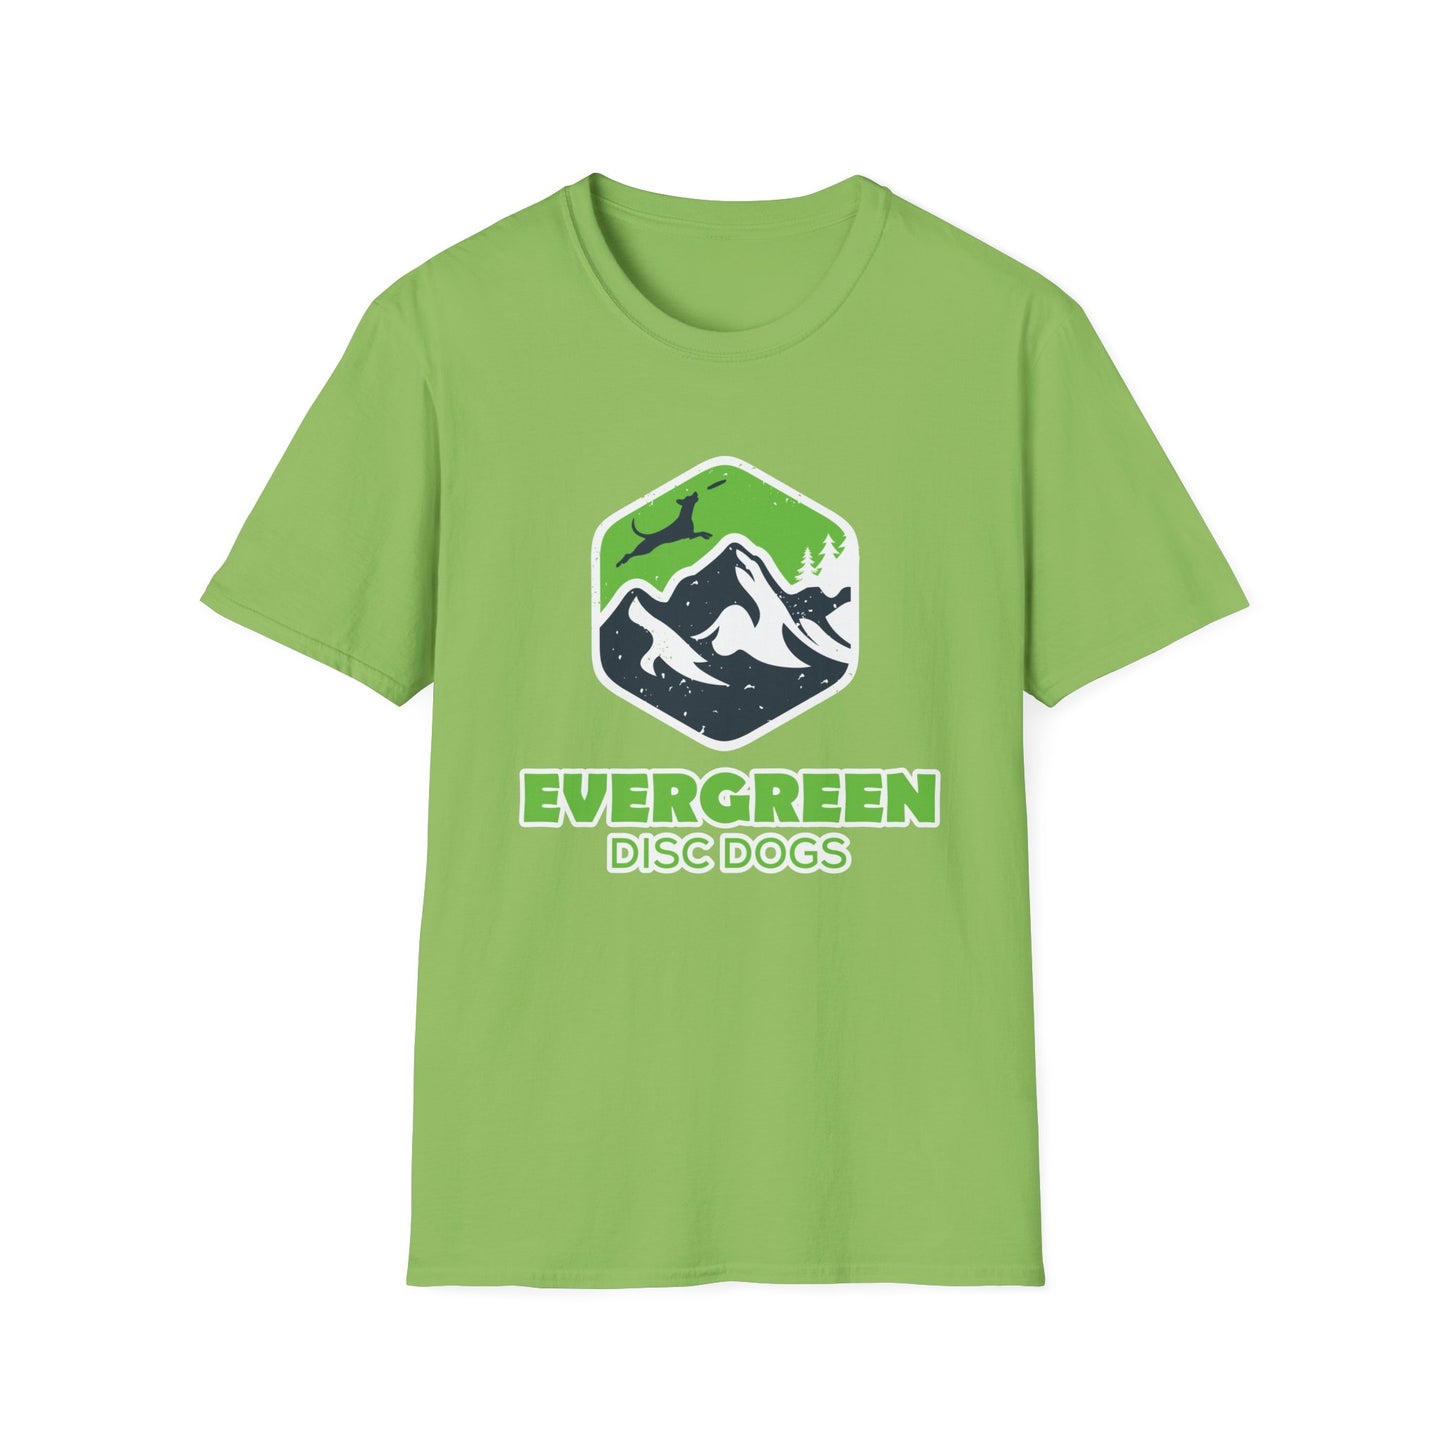 EVERGREEN DISC DOGS Unisex Softstyle T-Shirt